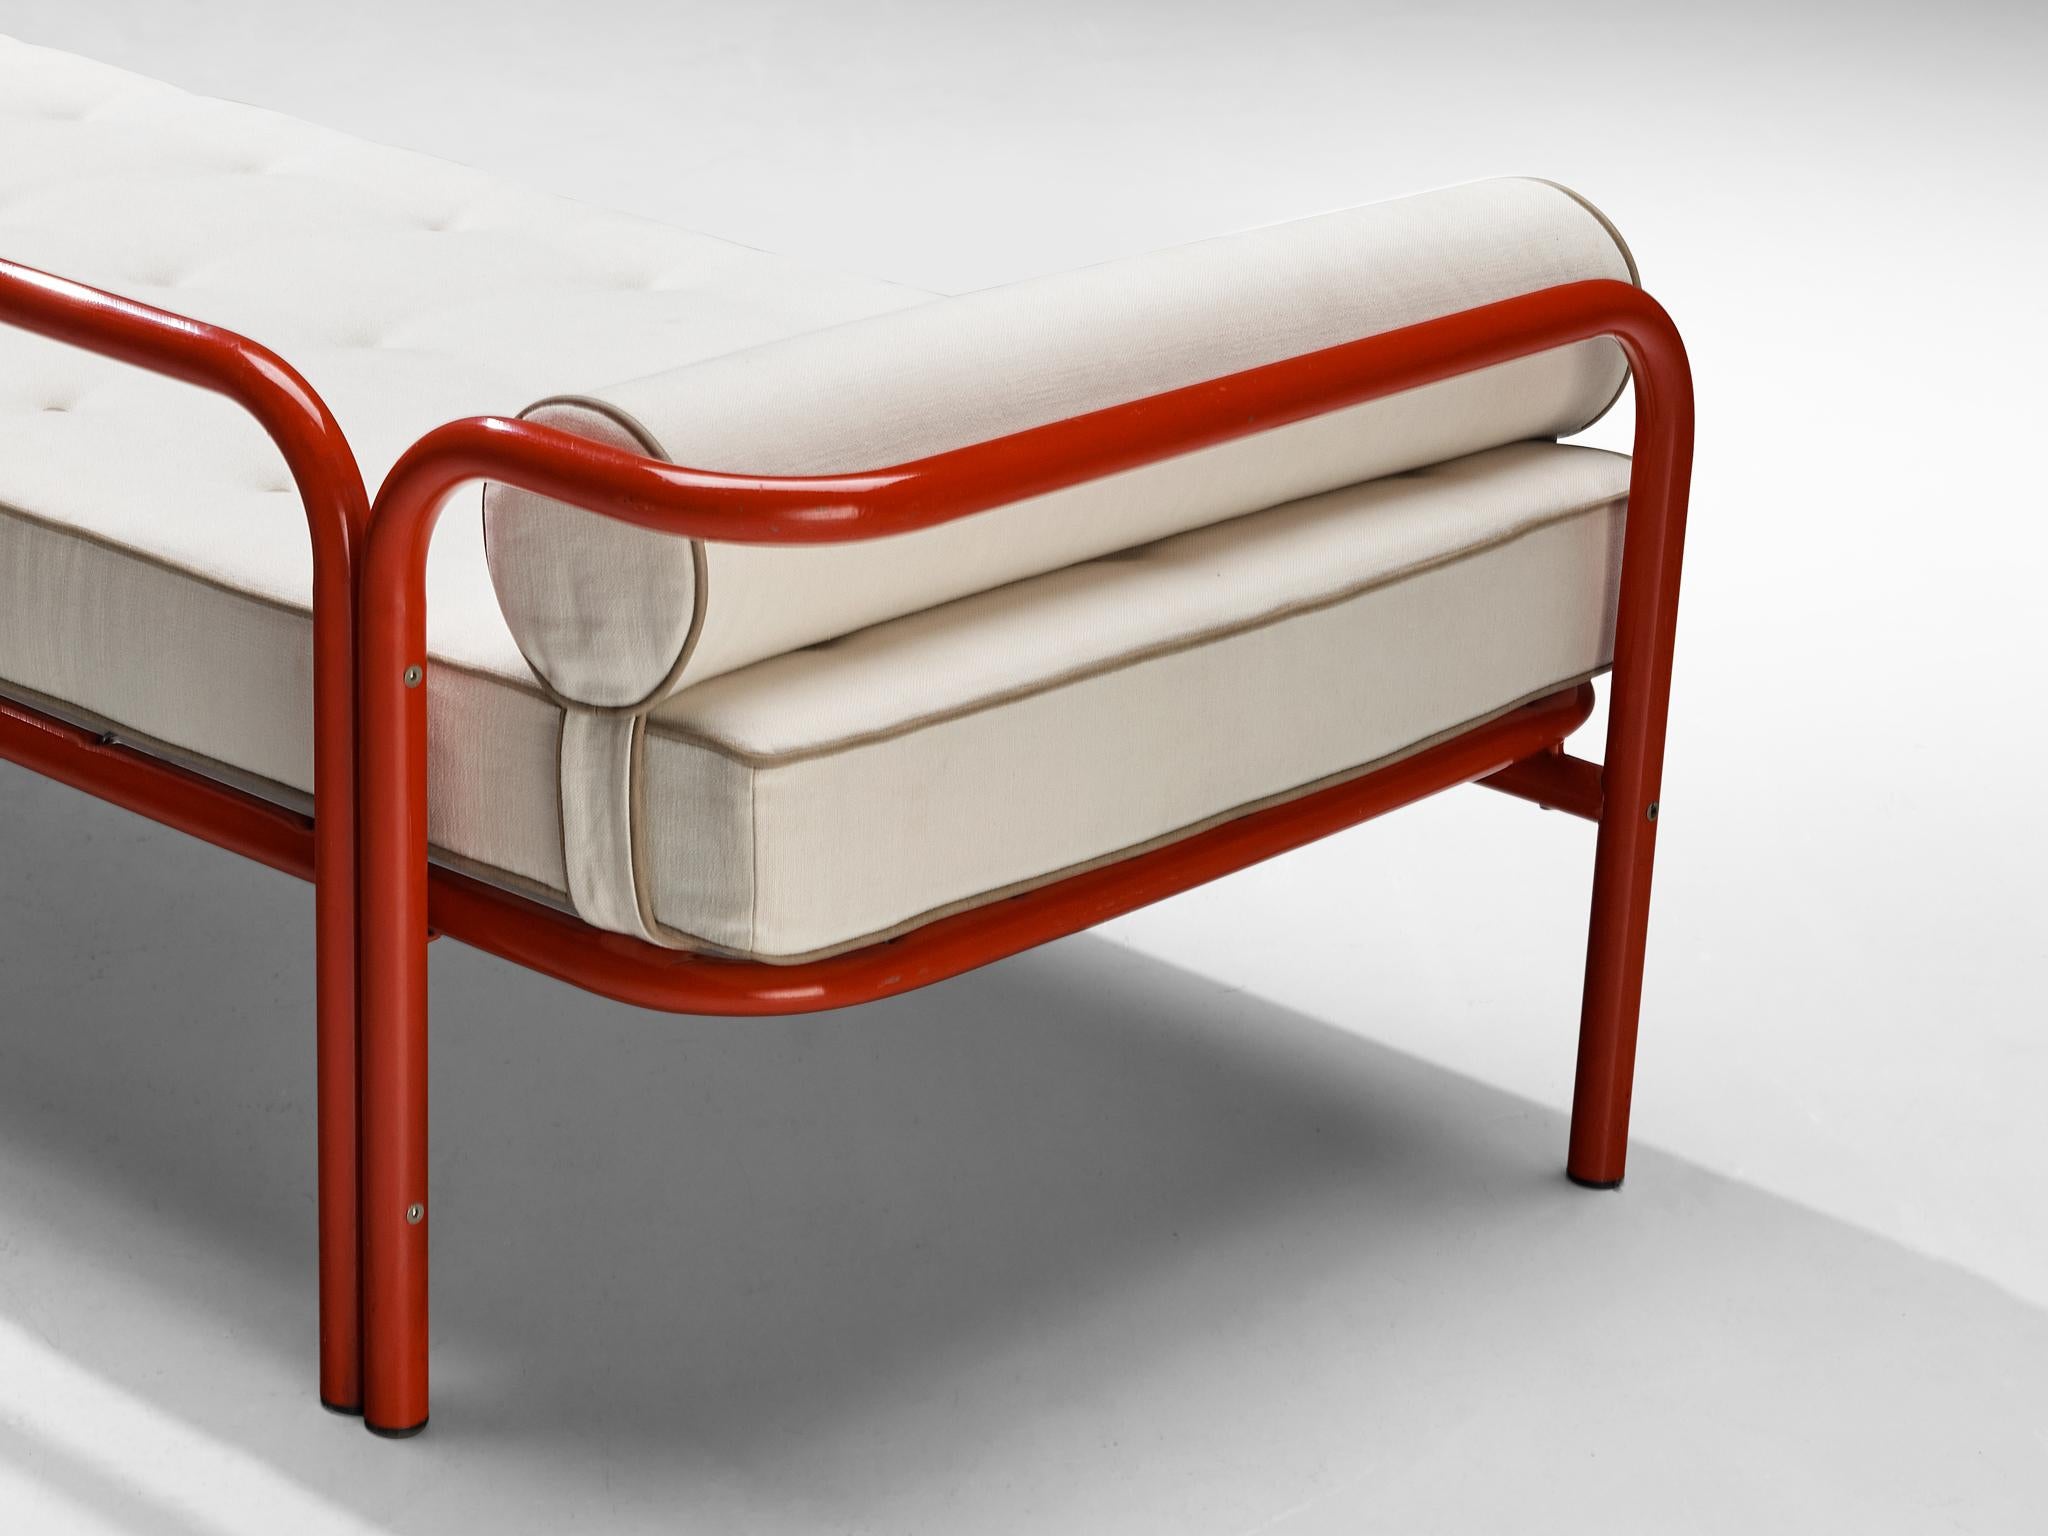 Gae Aulenti for Poltronova 'Locus Solus' Daybed in Red Steel  2